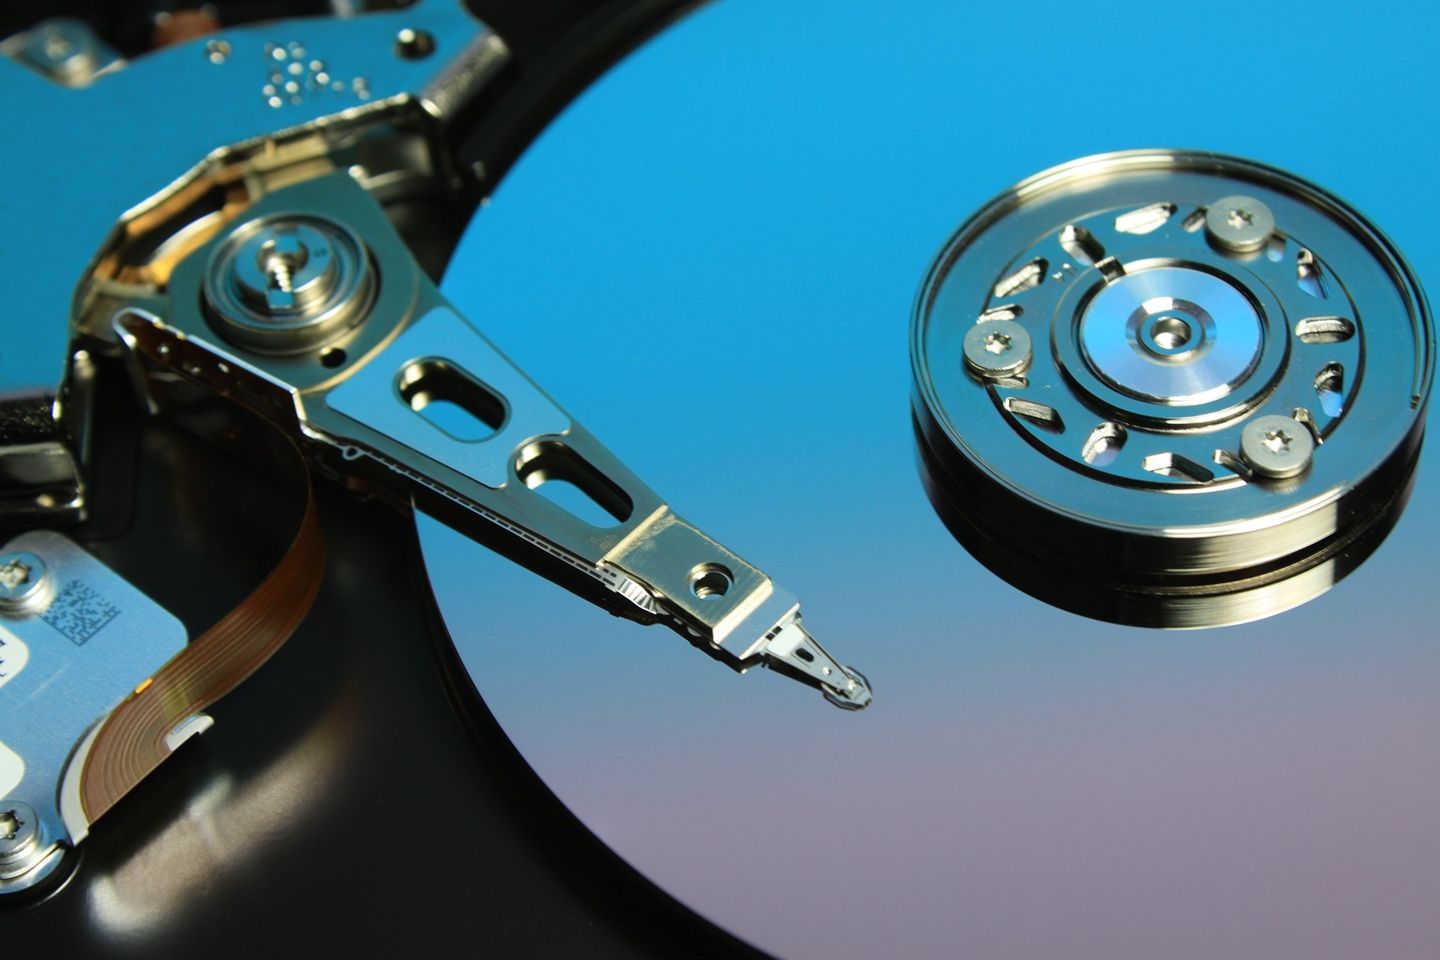 Illustration of a hard drive in operation.